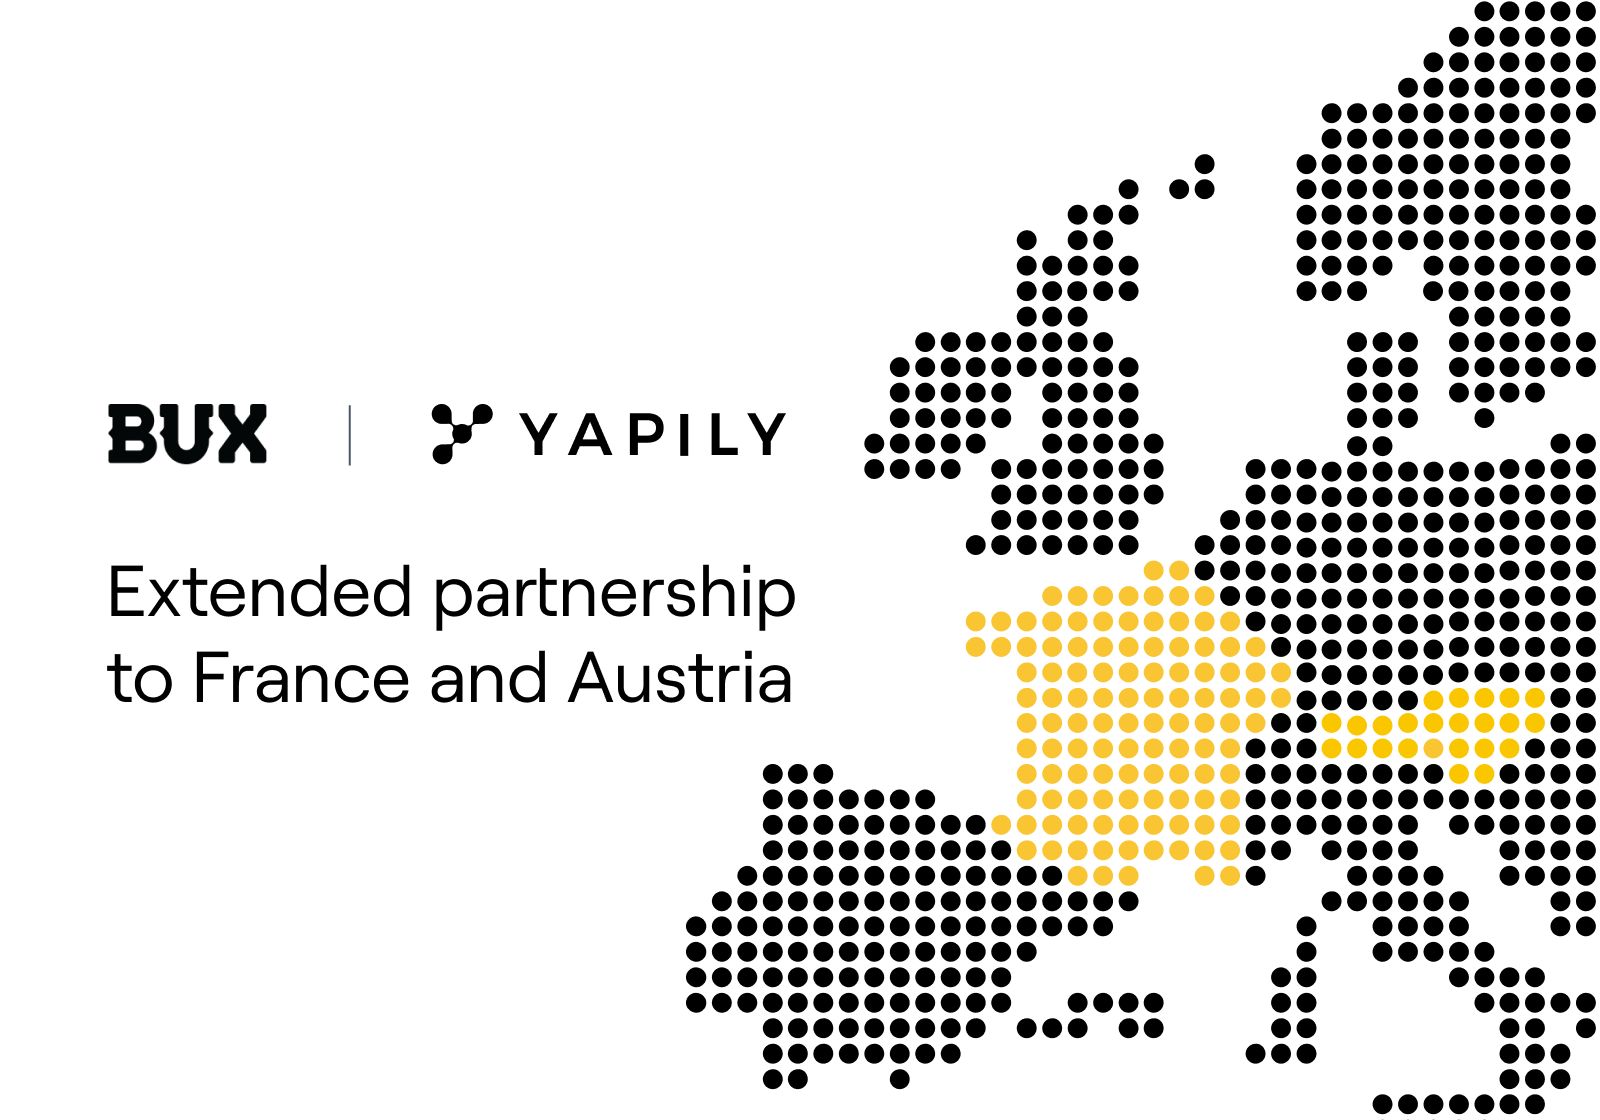 BUX has announced it has extended its partnership with leading enterprise connectivity platform Yapily to France and Austria. The move will enable French and Austrian users, to seamlessly fund their accounts and quickly build an investment portfolio.